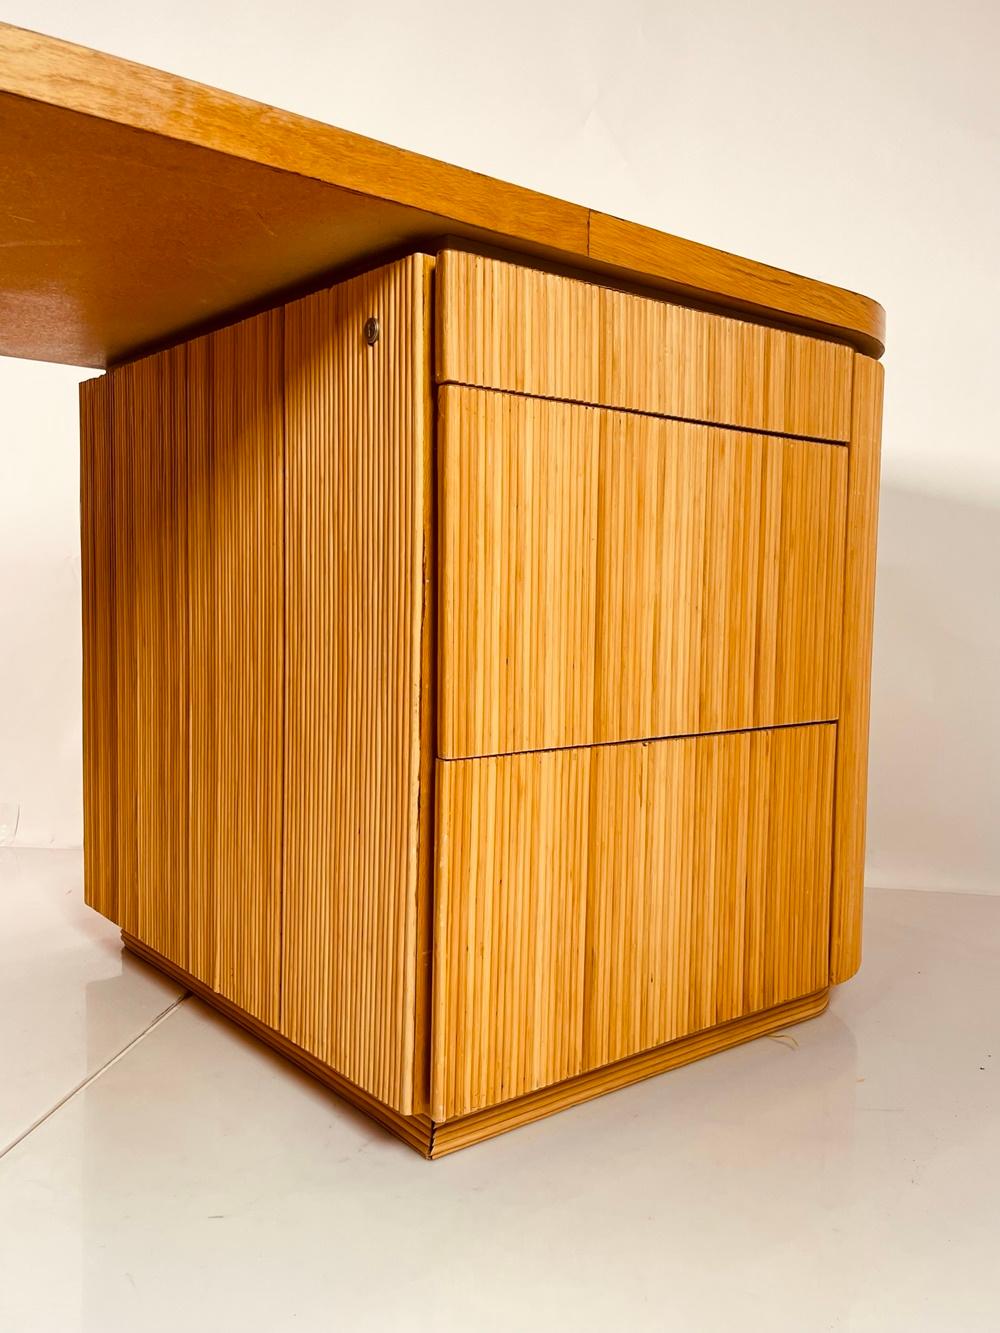 Pencil Reed Executive Desk in the Style of Karl Springer, USA 1970's For Sale 7